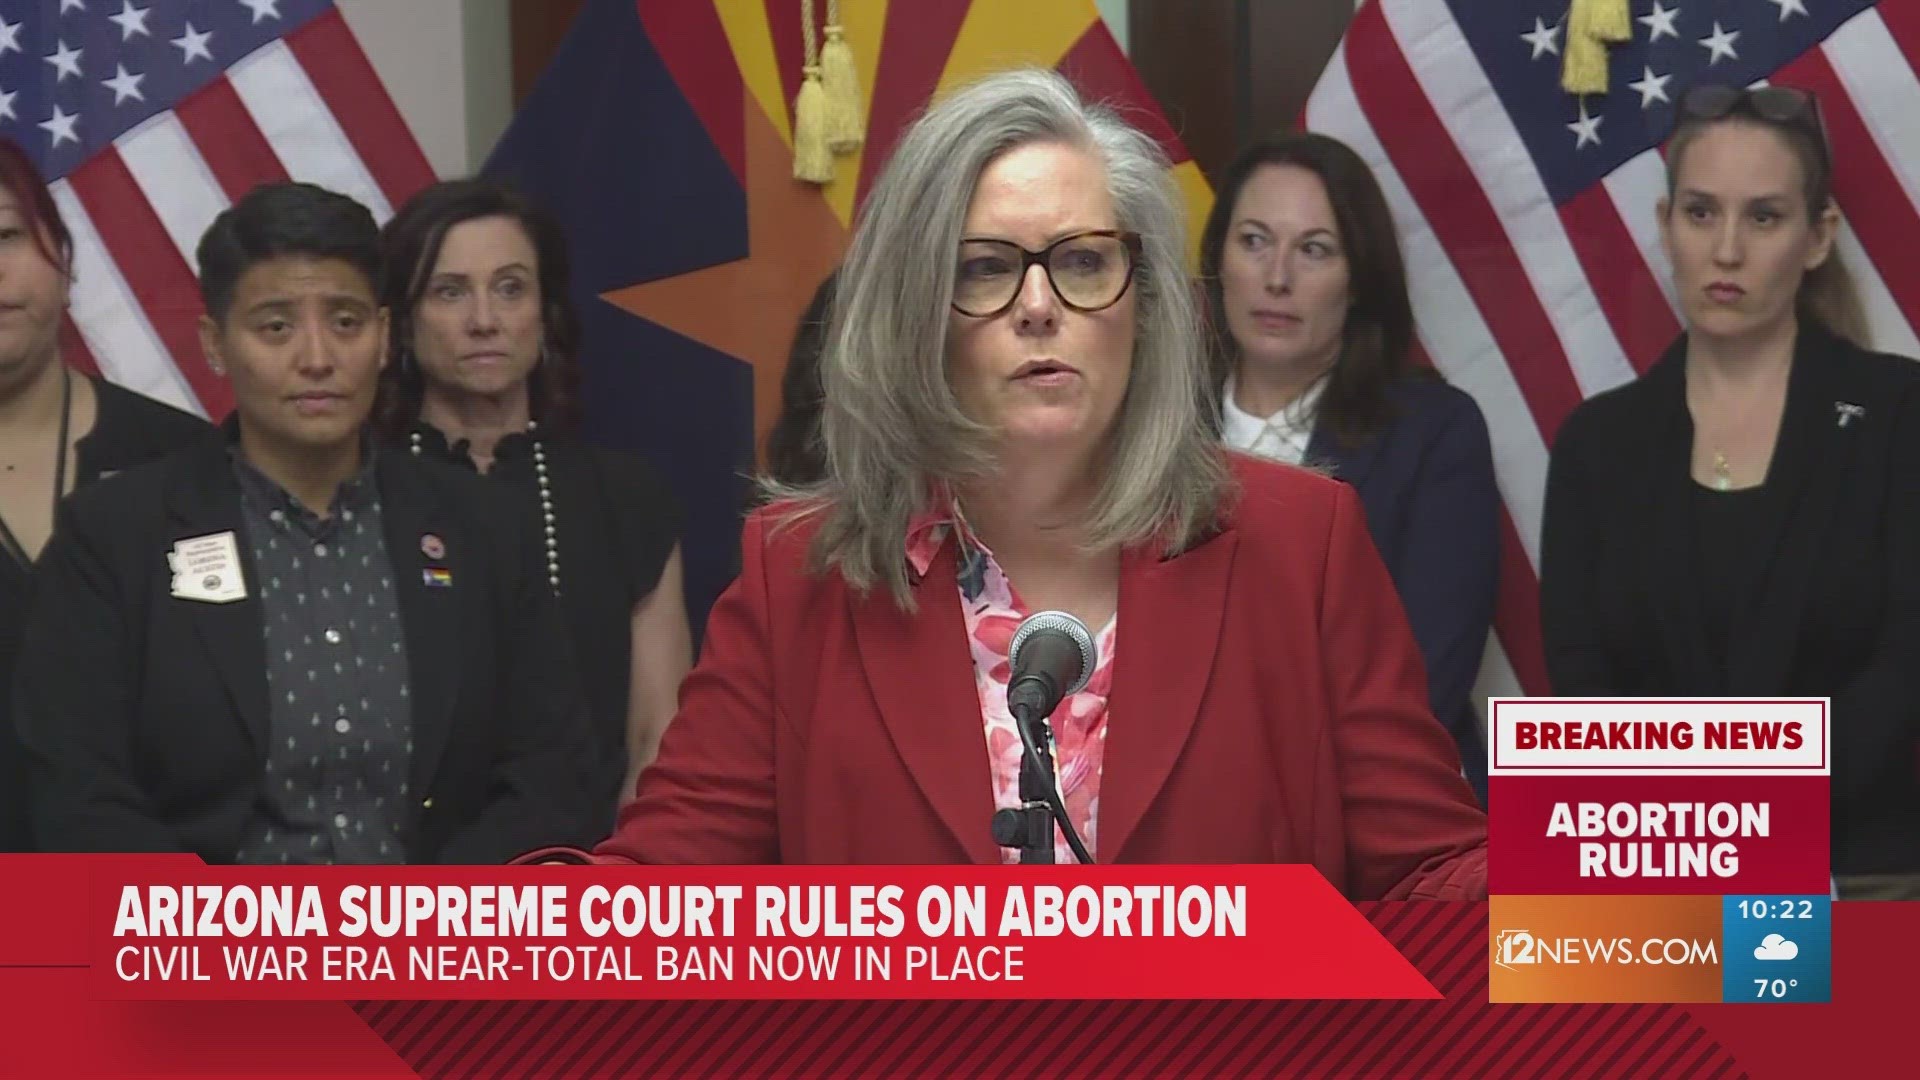 The Arizona Supreme Court announced its decision to make nearly all elective abortions illegal. Gov. Hobbs and other officials react to the news.